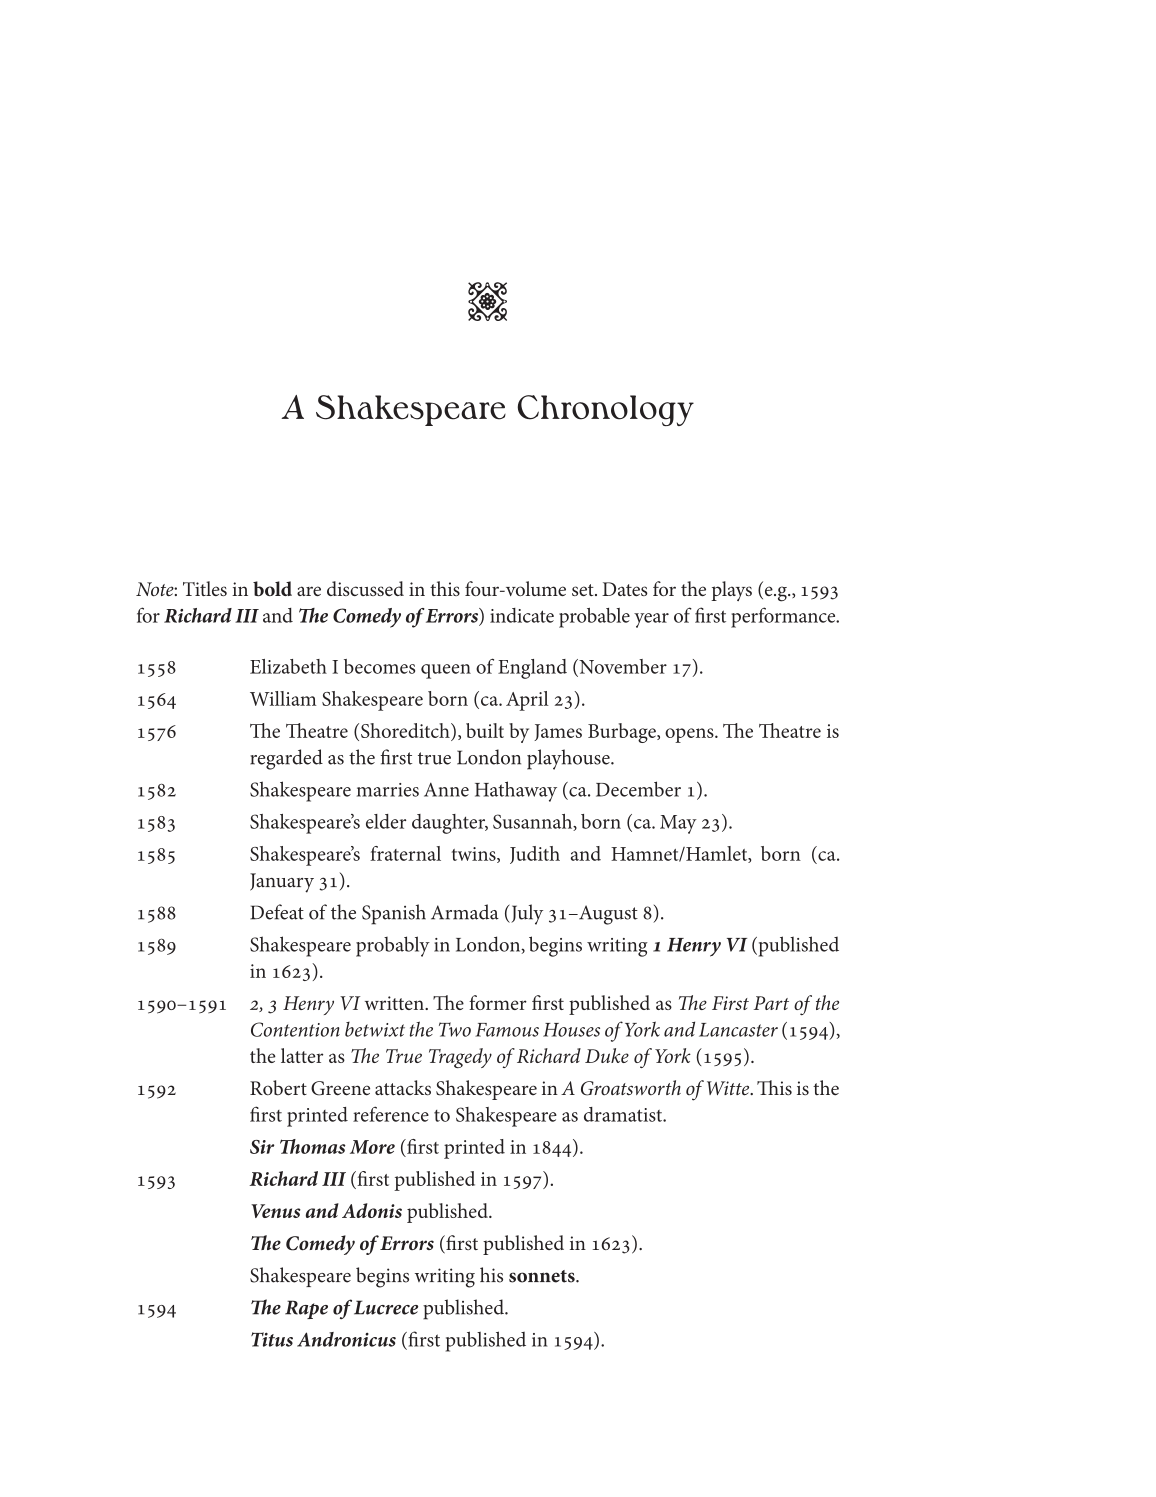 The Definitive Shakespeare Companion: Overviews, Documents, and Analysis [4 volumes] page xv